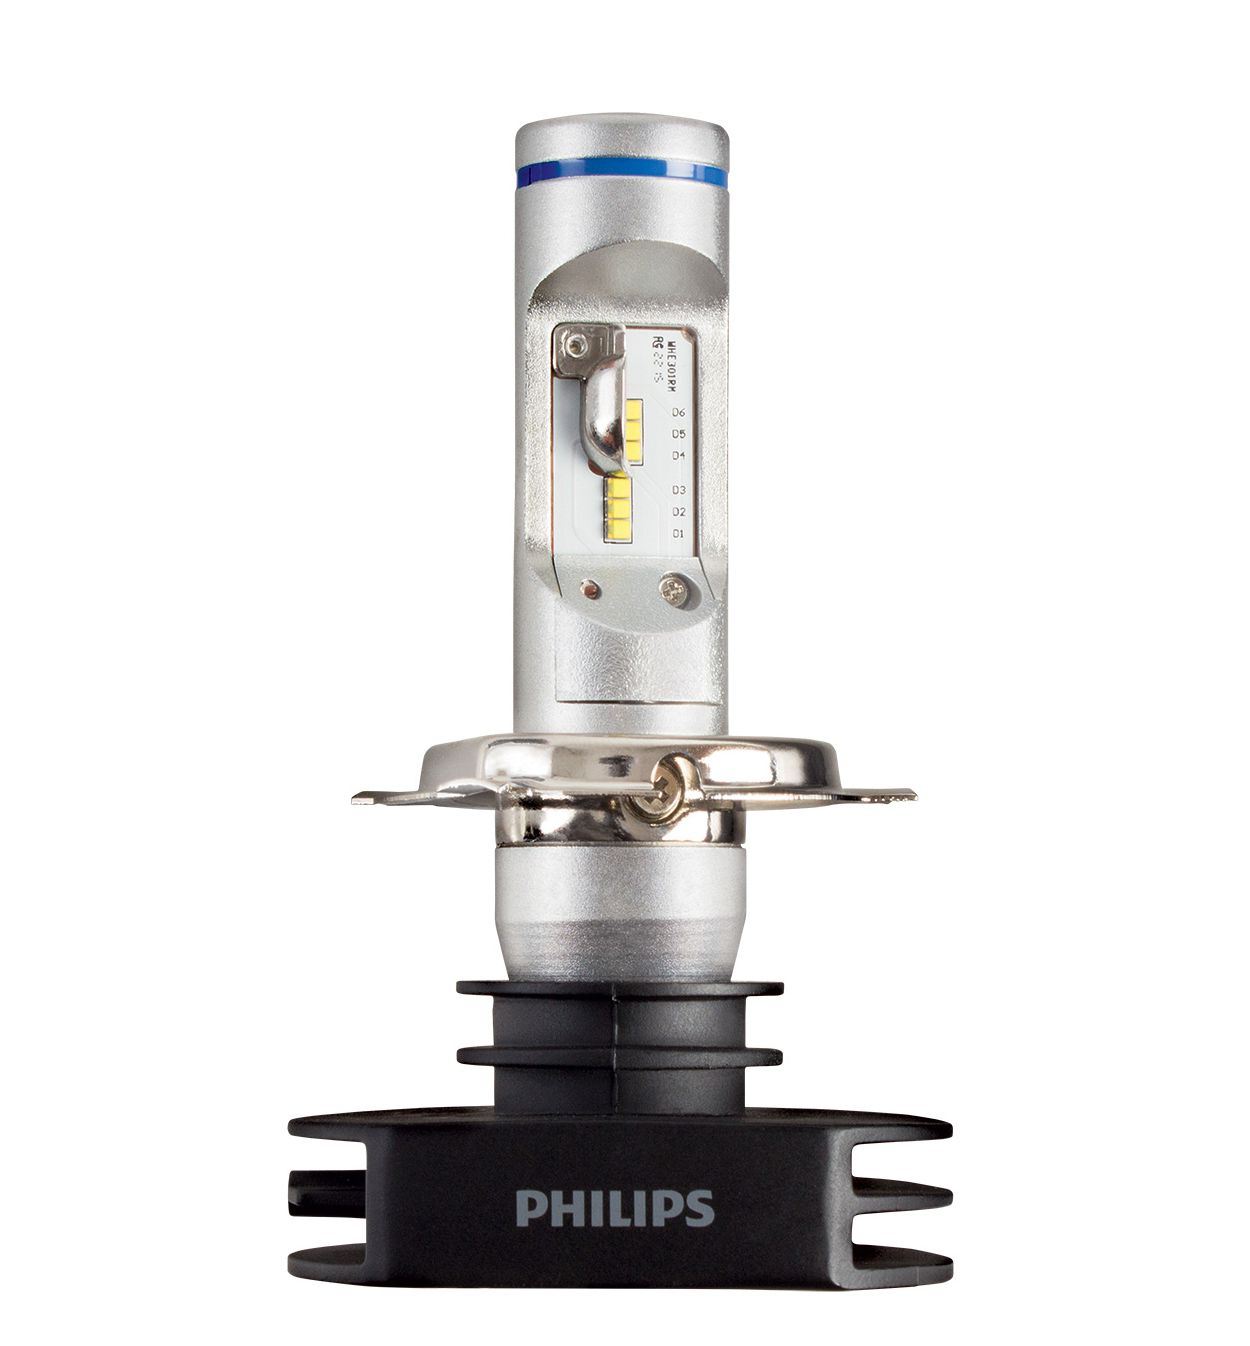 Linear PHILIPS LED Head H4 Bulb, 5 W and Below at best price in